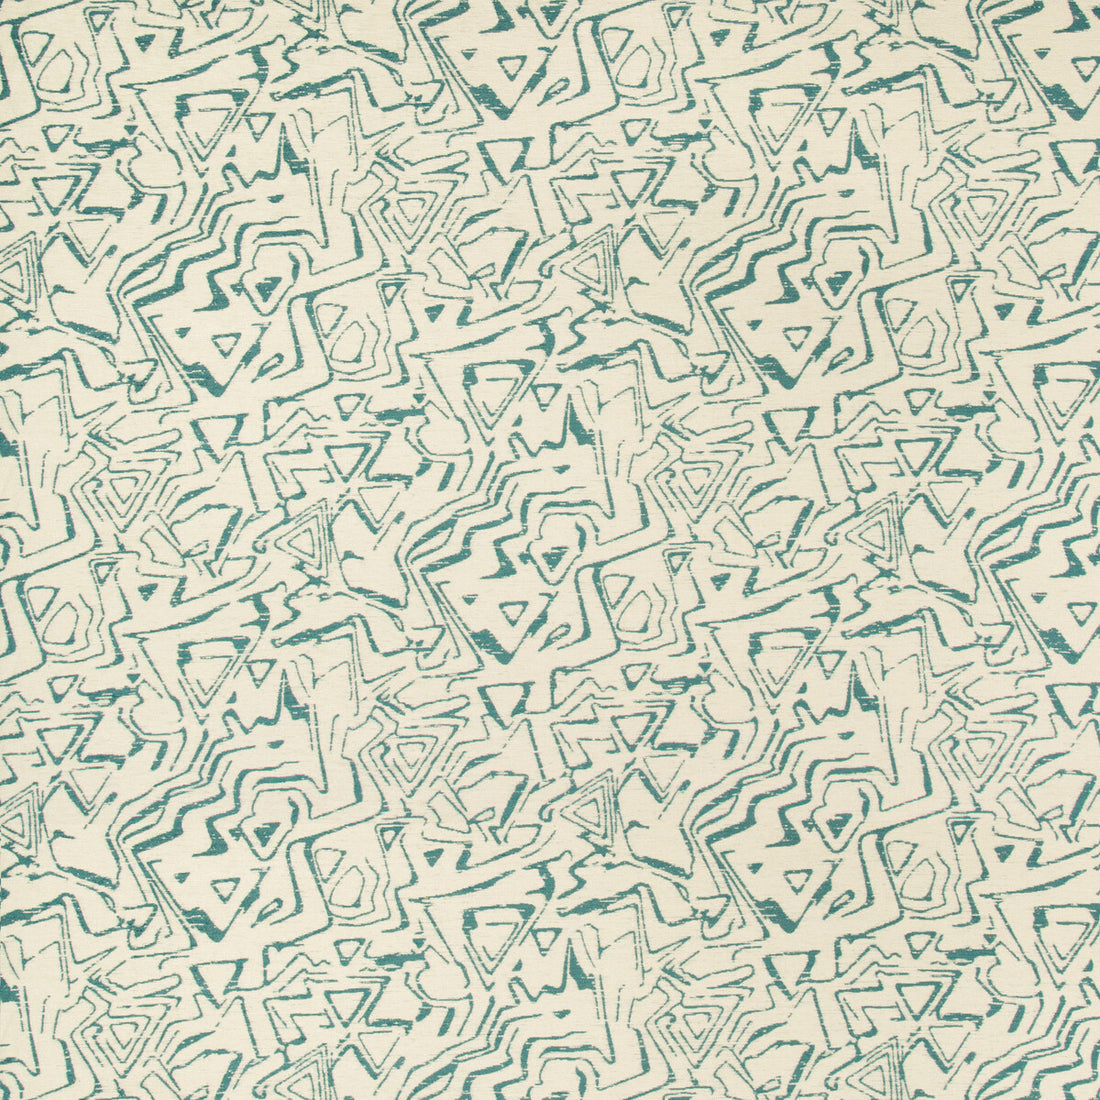 Kravet Contract fabric in 35030-13 color - pattern 35030.13.0 - by Kravet Contract in the Incase Crypton Gis collection